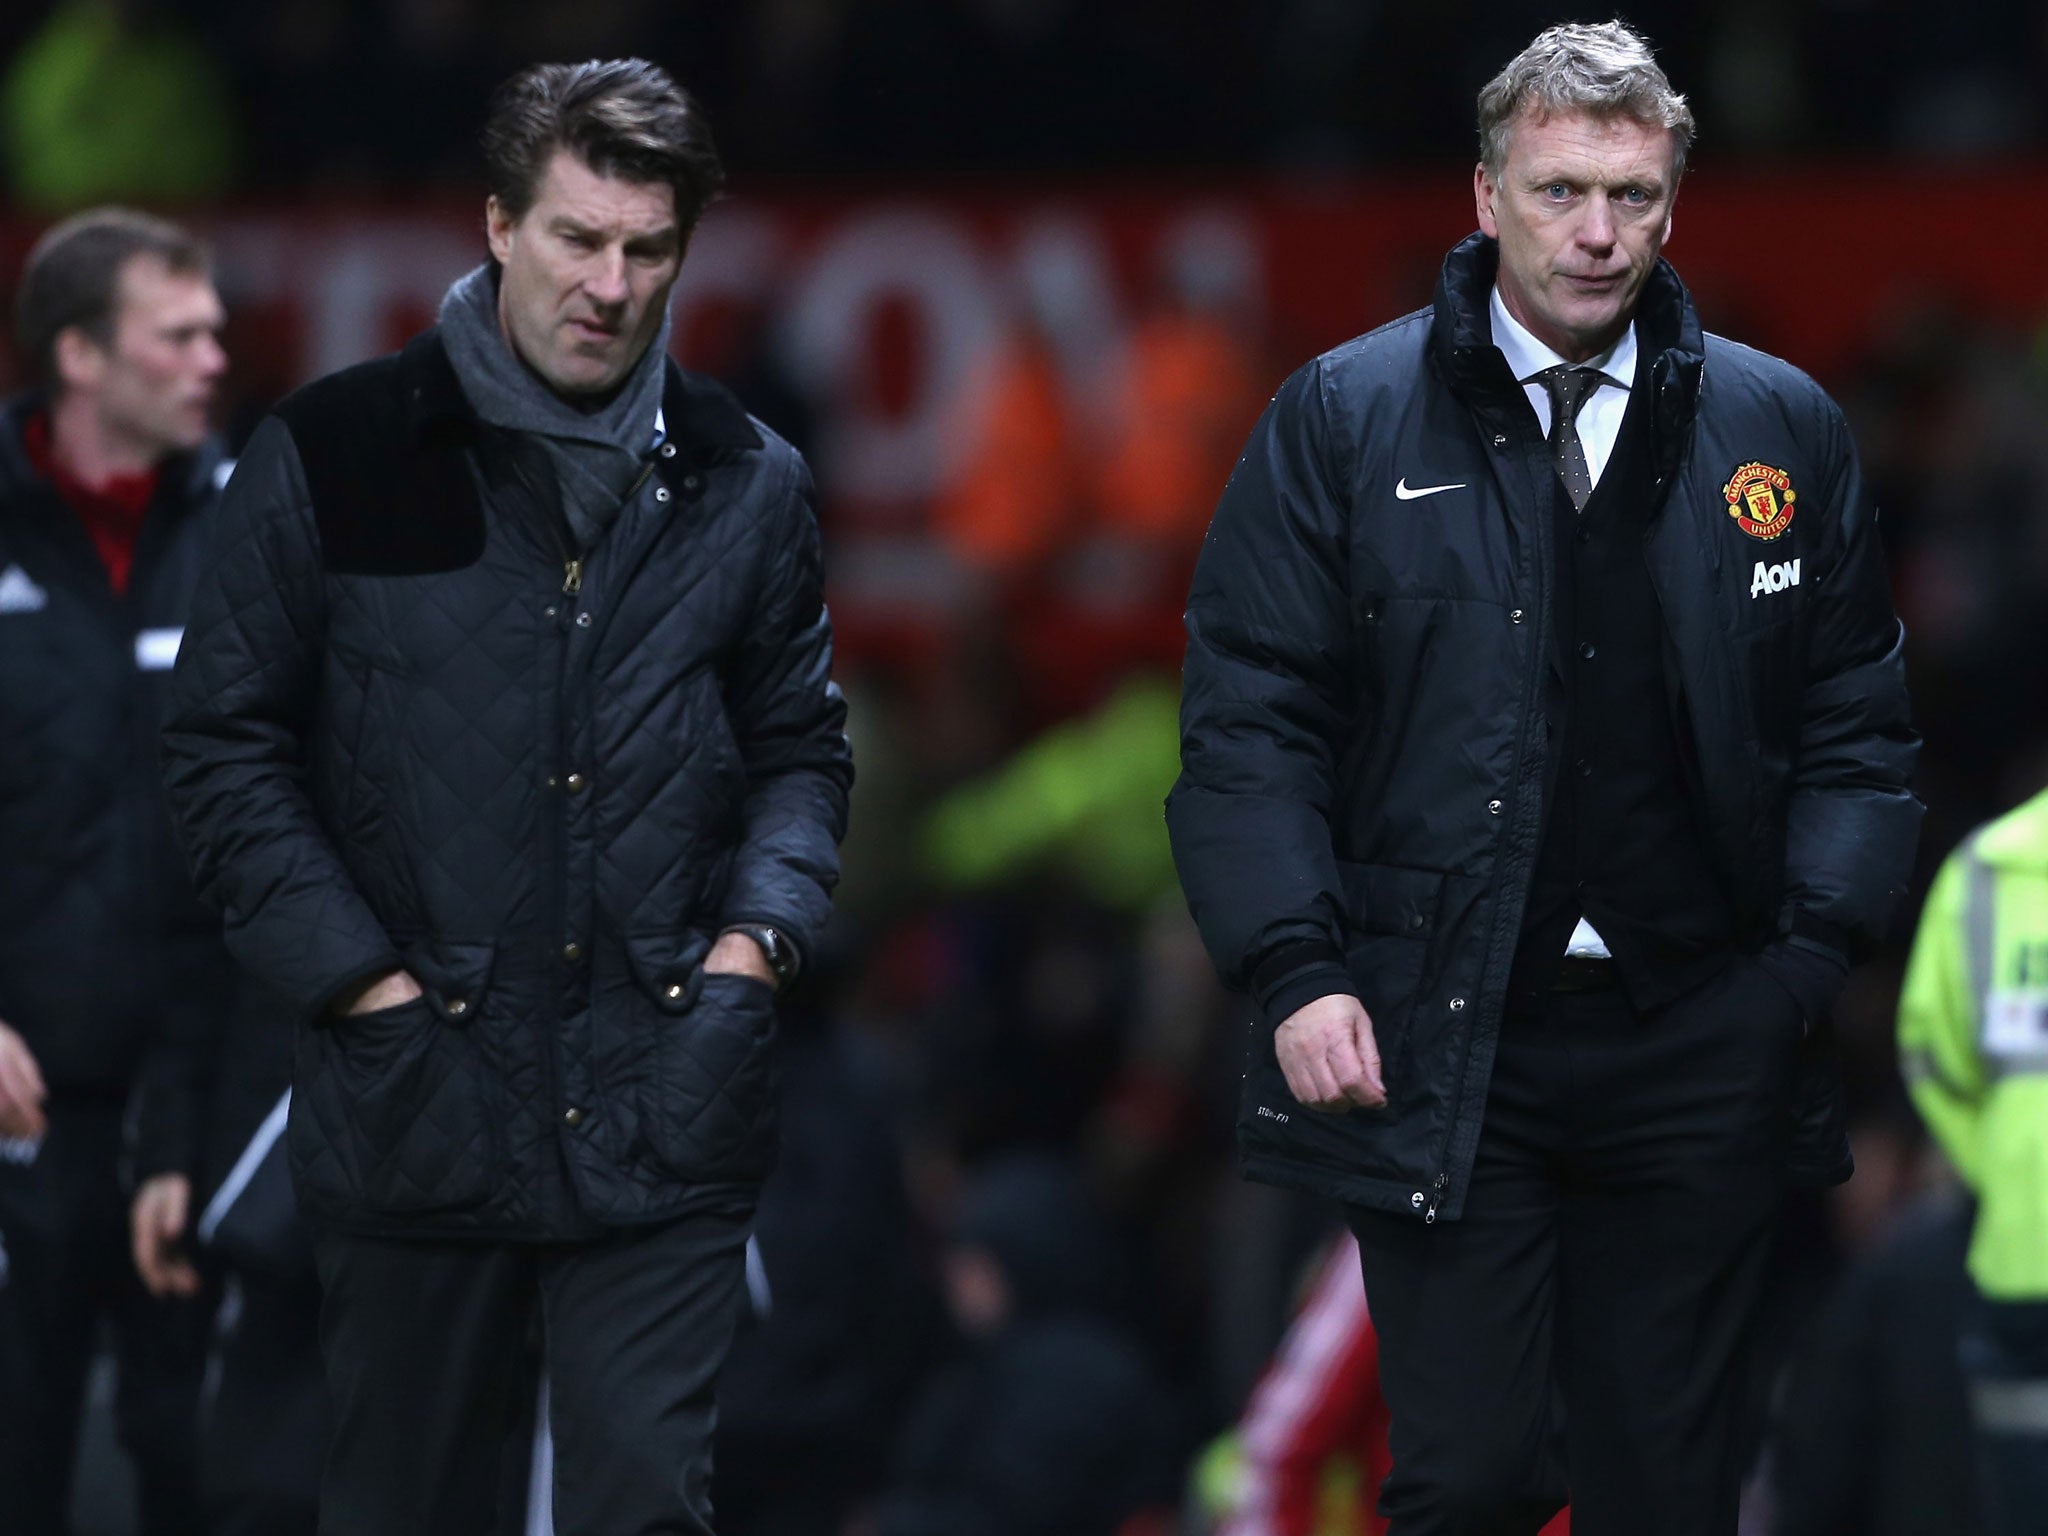 Michael Laudrup and David Moyes had mixed emotions after Swansea knocked Manchester United out of the FA Cup via a 2-1 victory